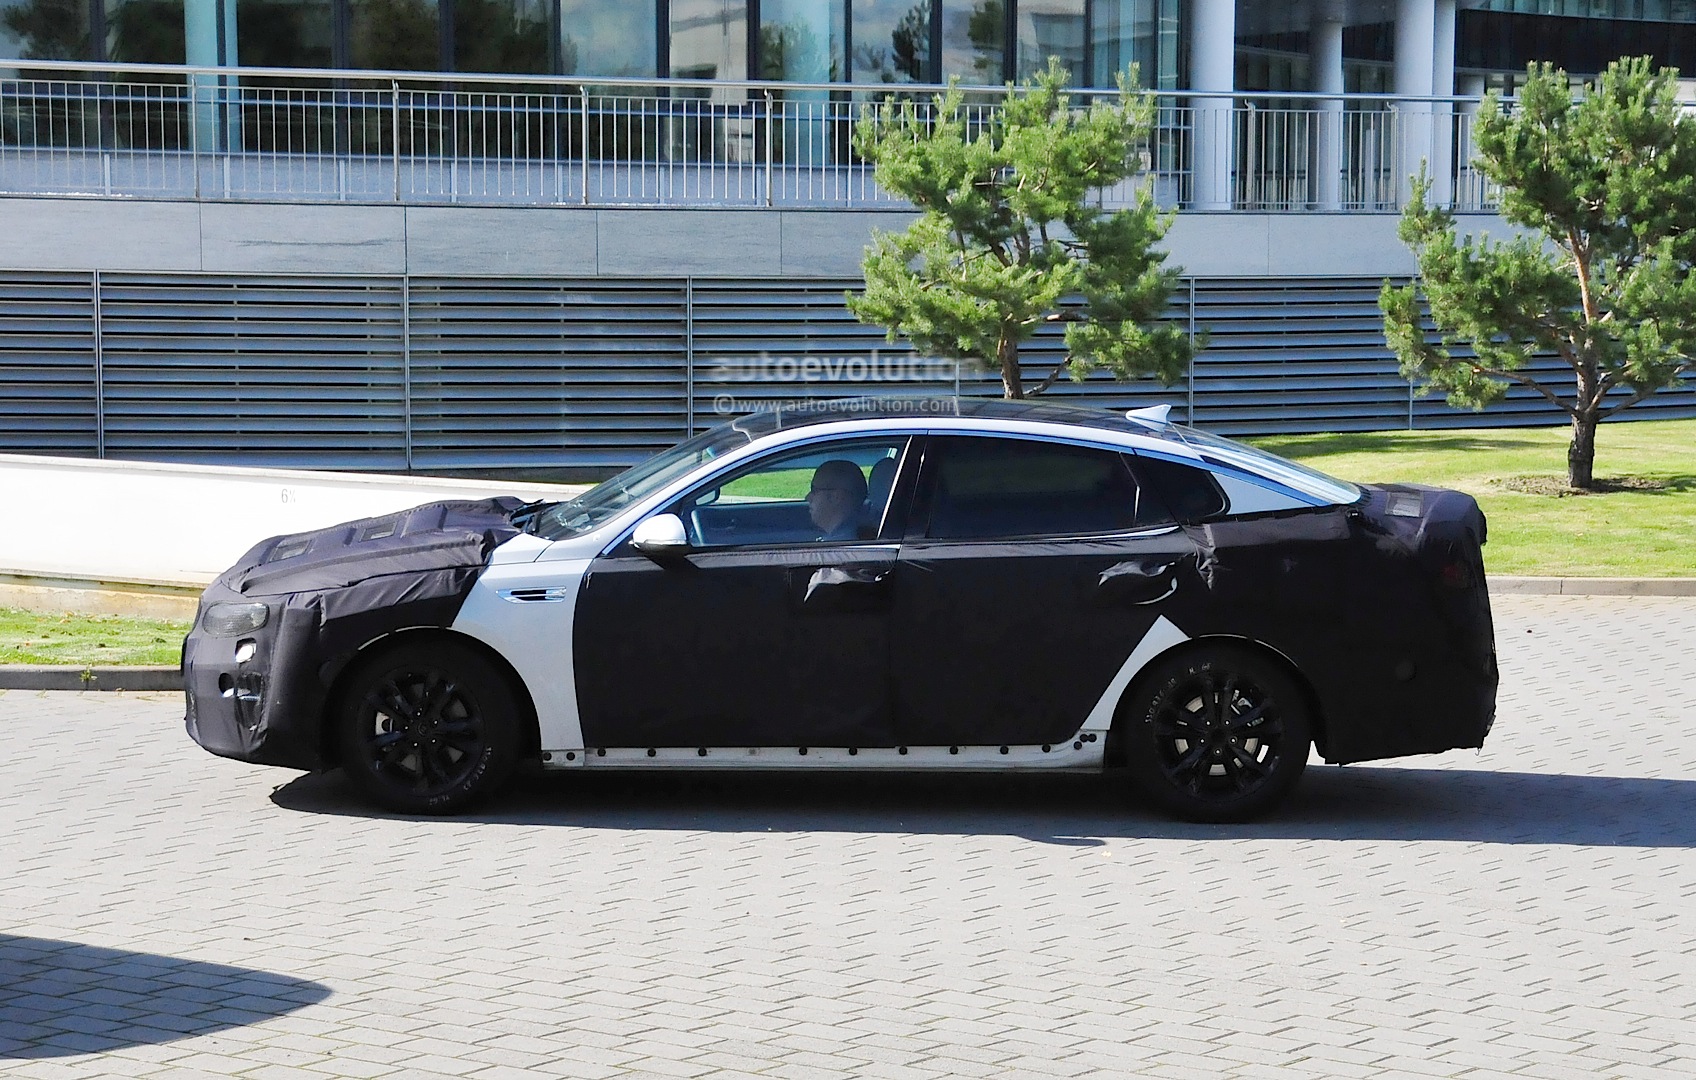 all-new-2016-kia-optima-spied-for-the-first-time-including-the-interior_4